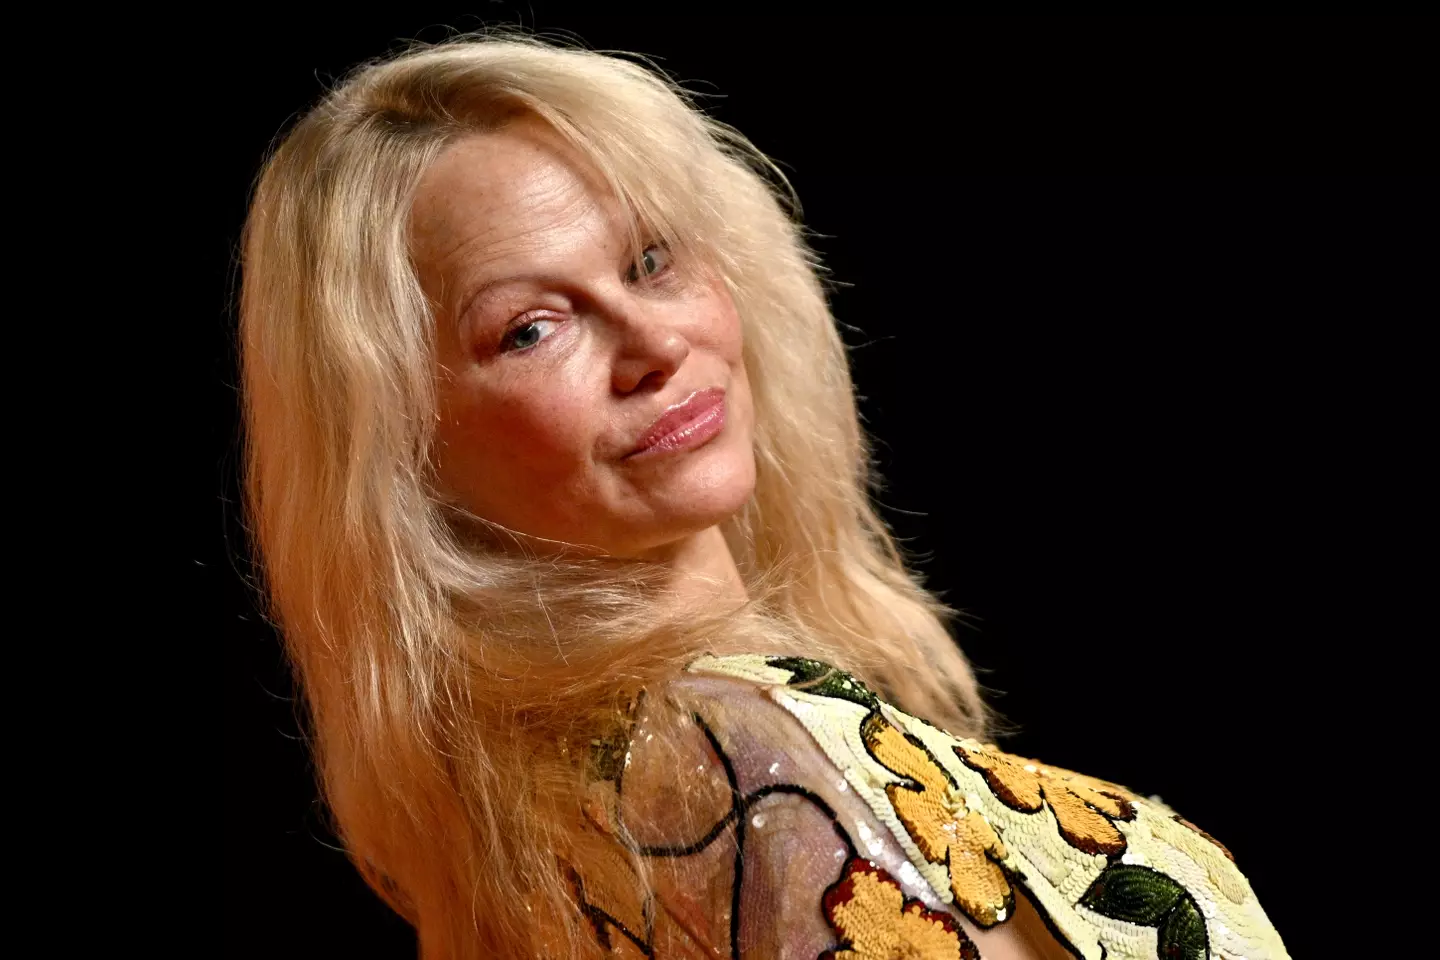 Pamela Anderson went bare-faced at the star-studded Oscars party.